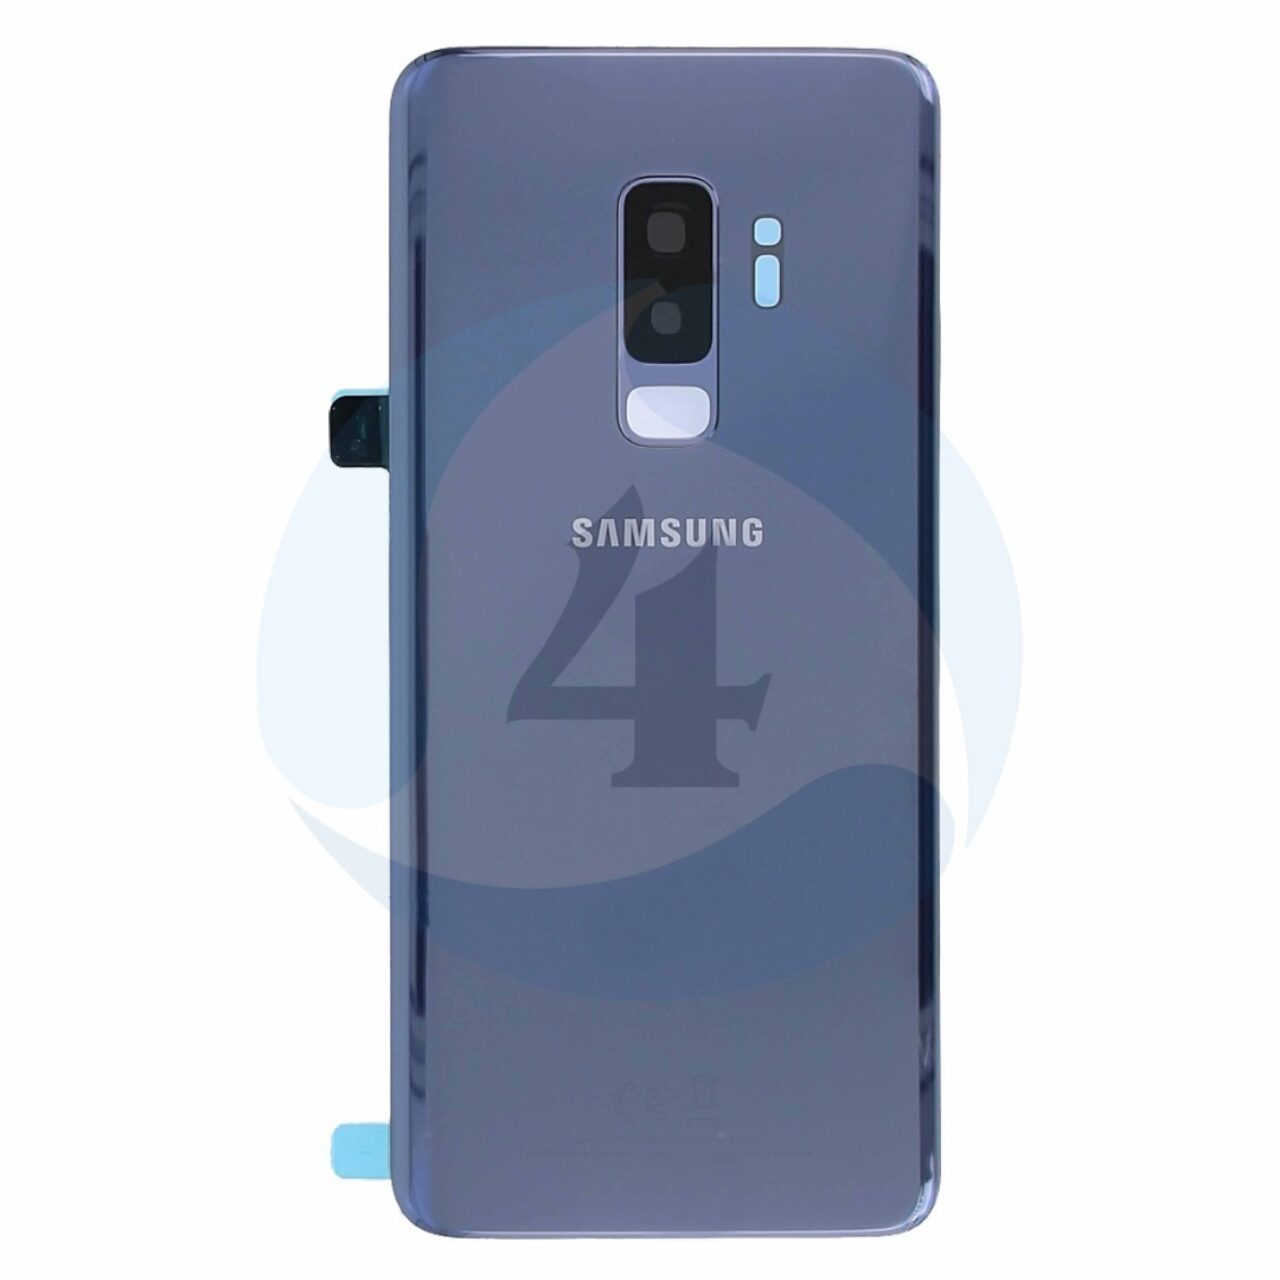 Backcover Blue For Samsung Galaxy S9 plus SM G965